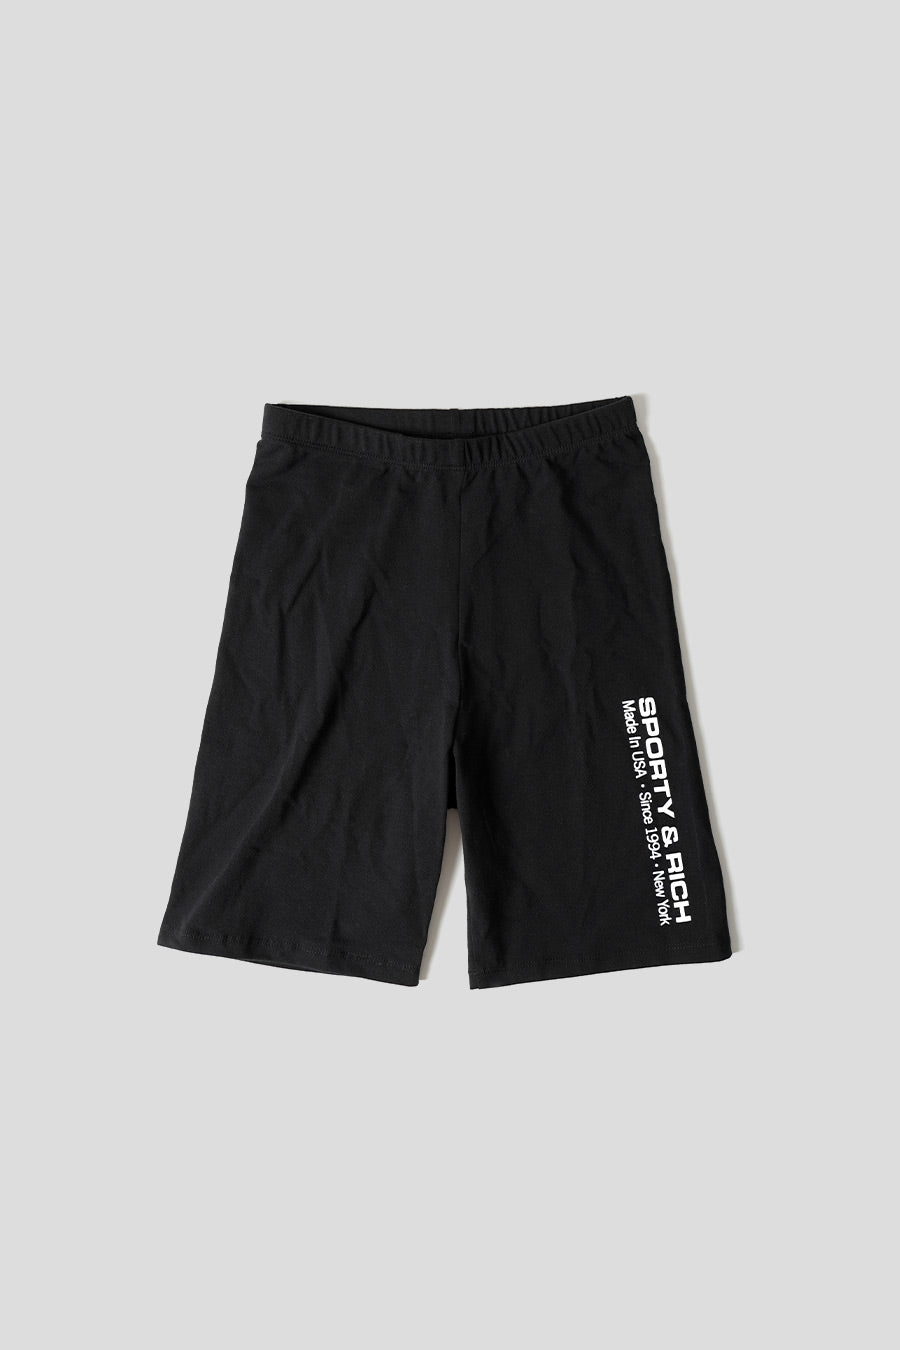 Sporty & Rich - MADE IN USA SHORTS BLACK - LE LABO STORE